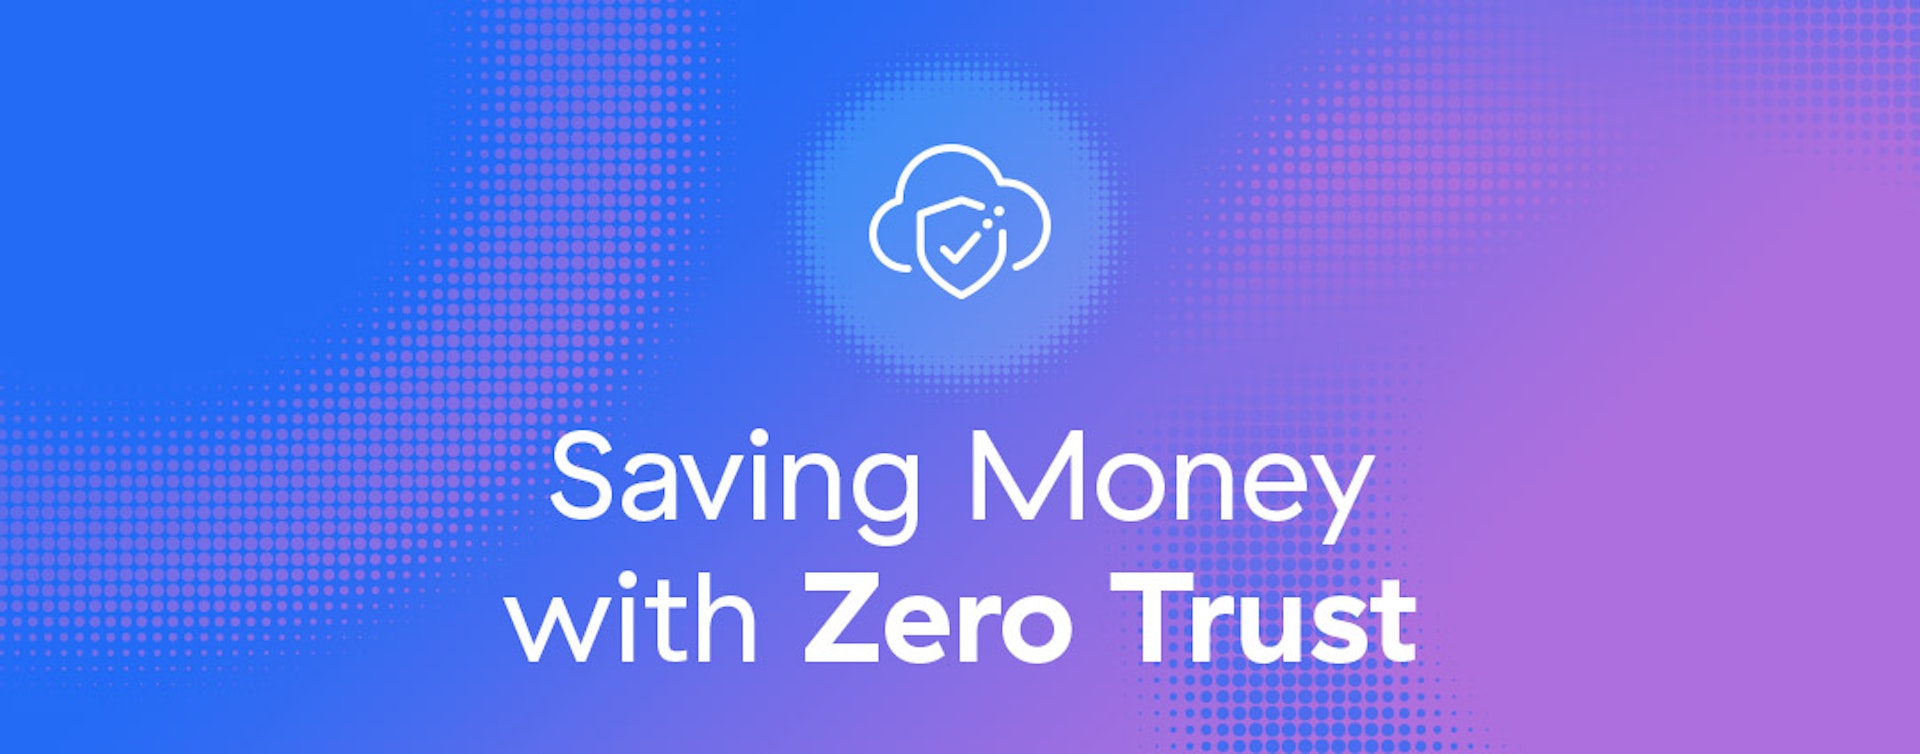 Saving Money with Zero Trust Part 4: Stopping Costly Breaches